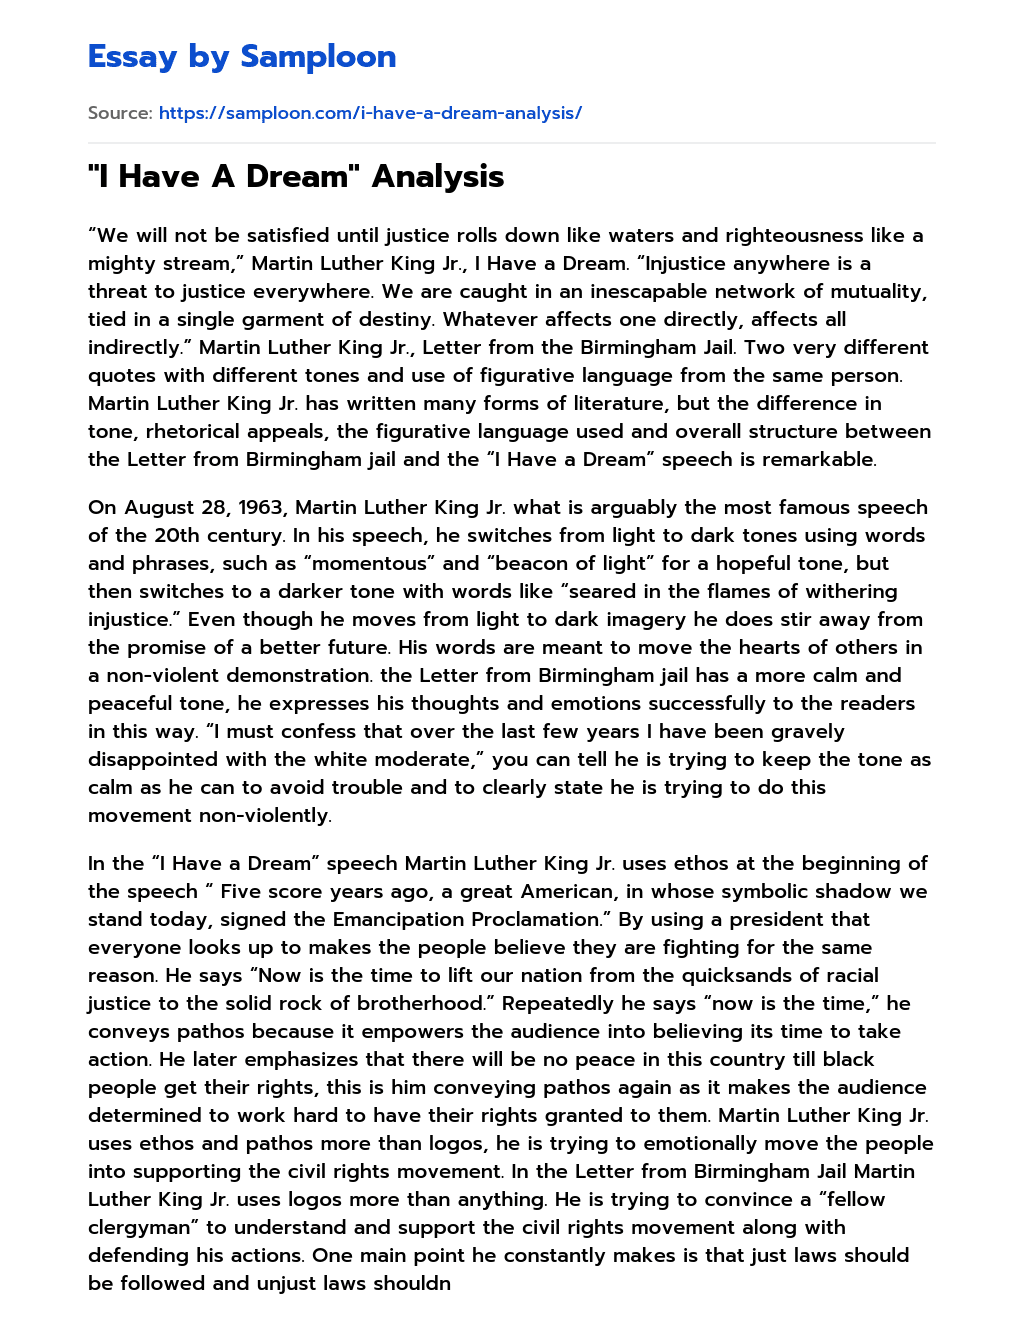 i have a dream speech conclusion analysis